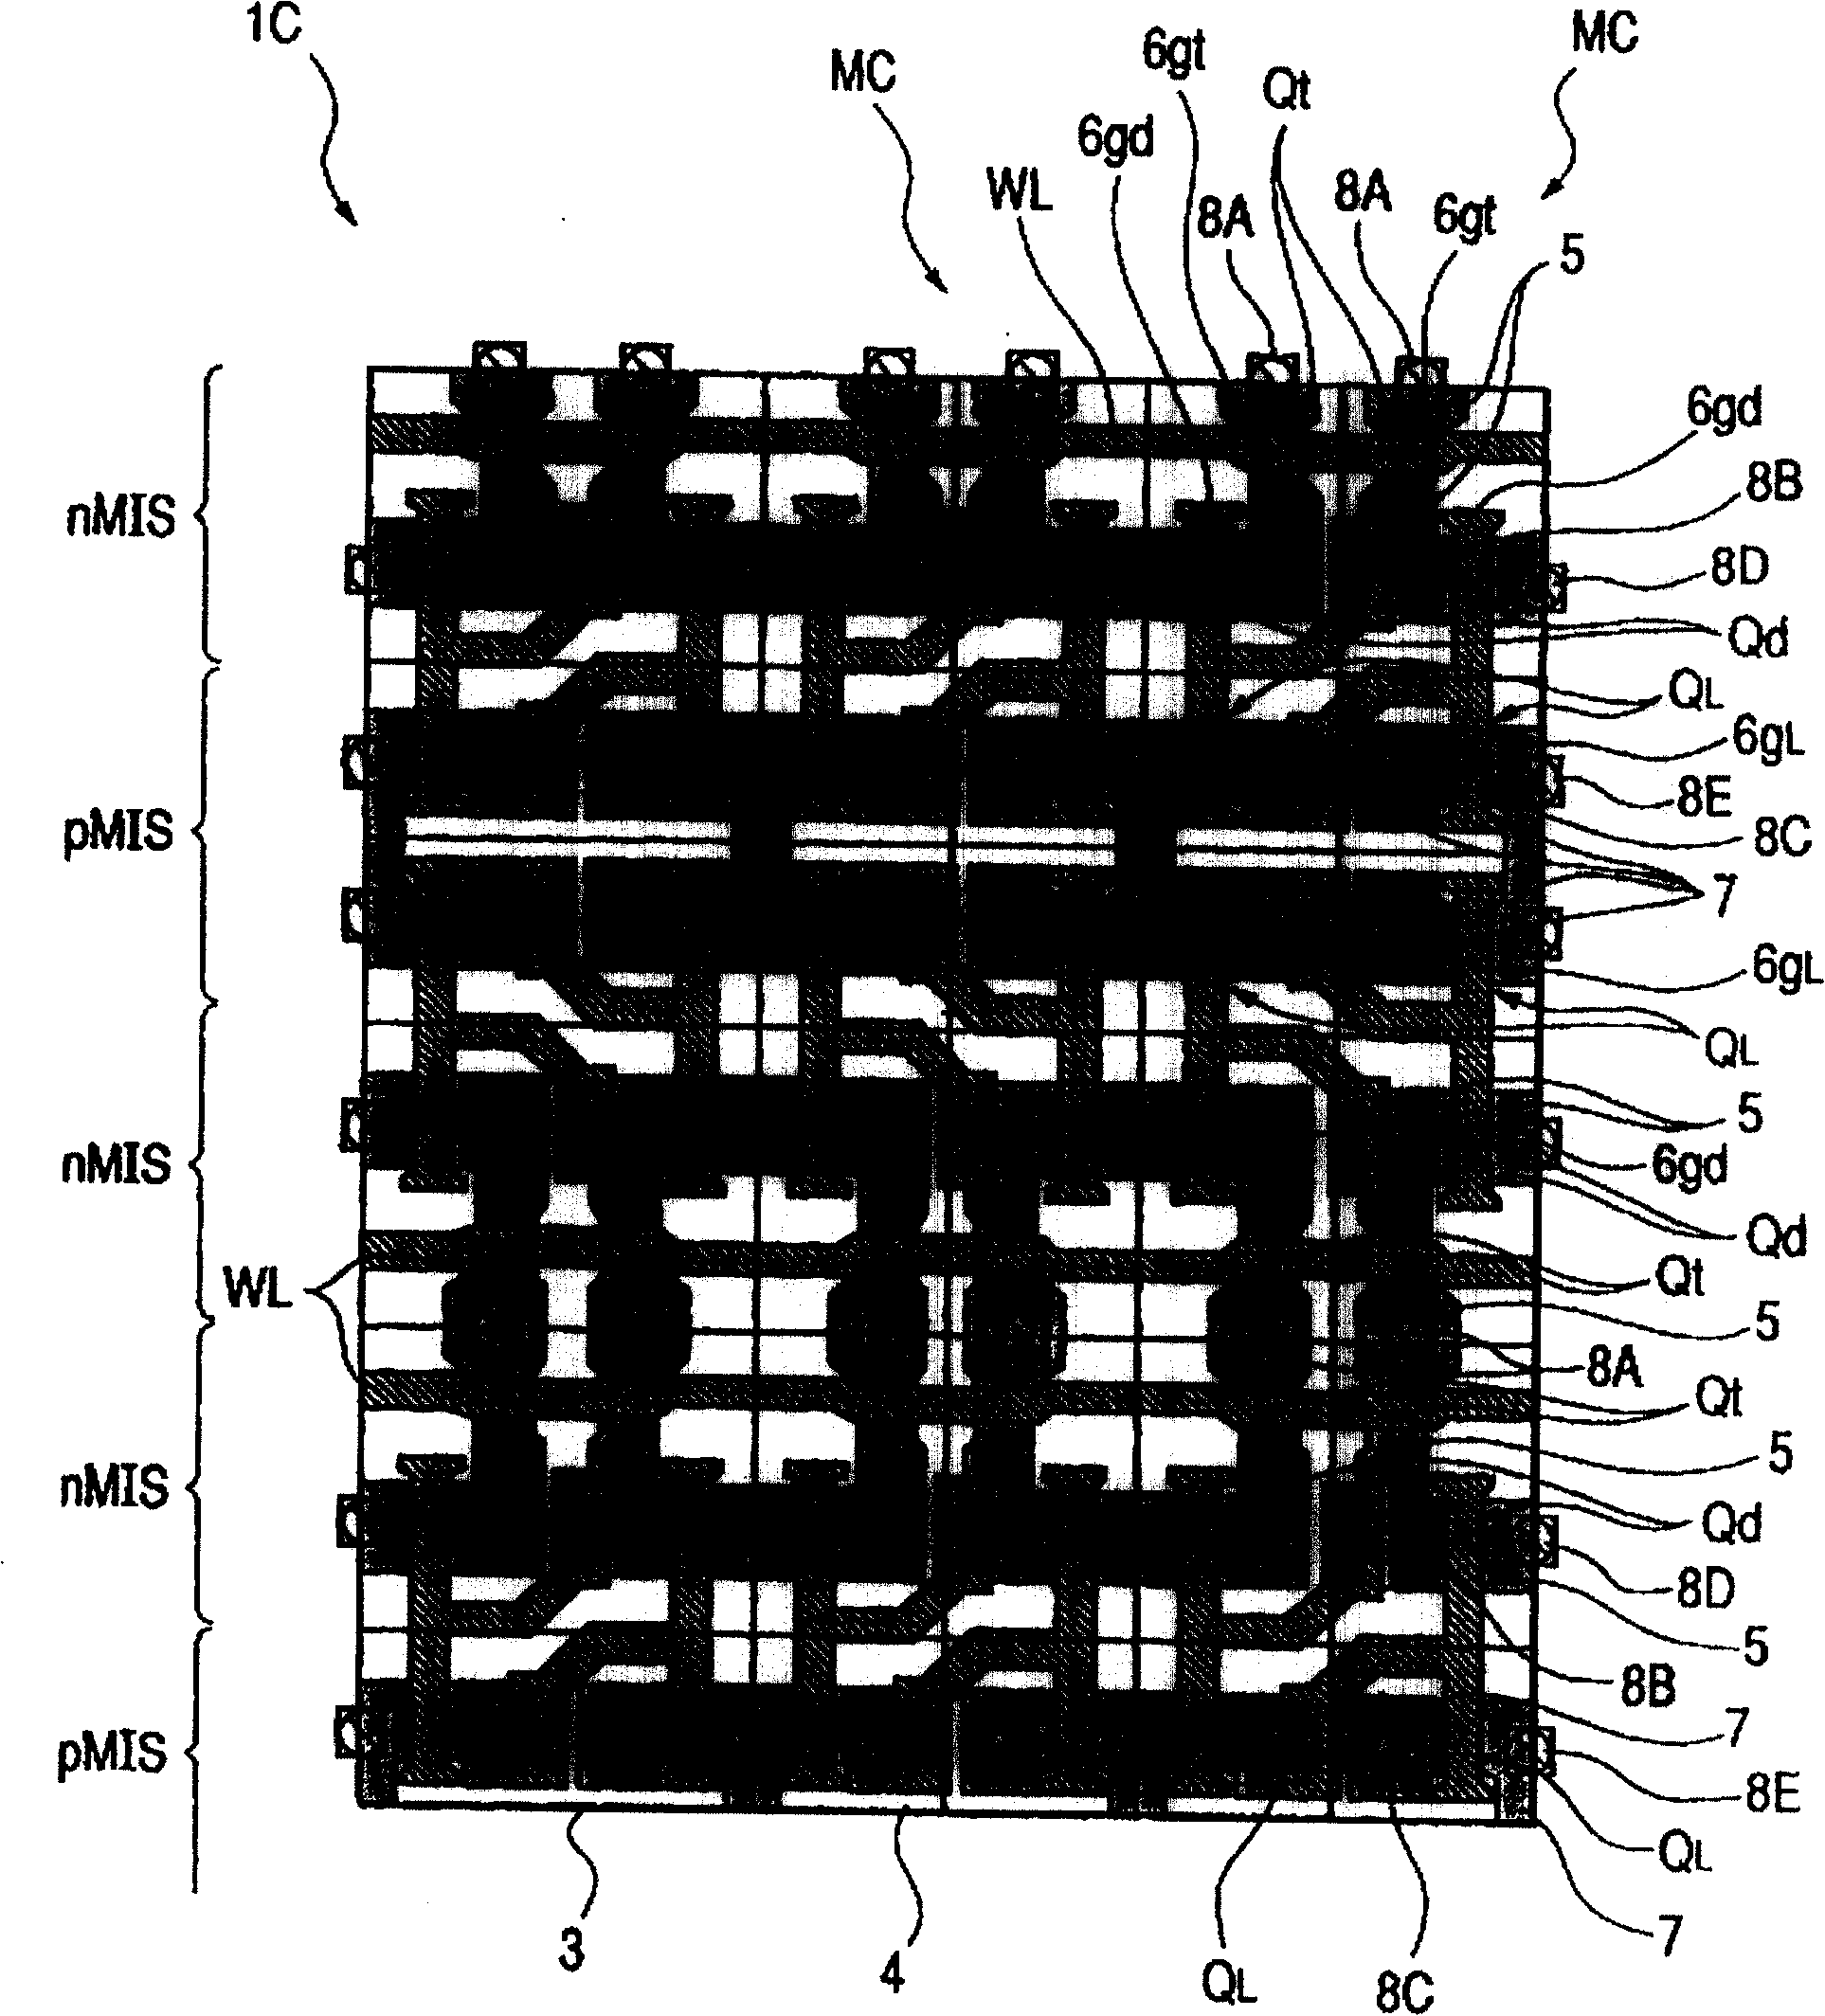 Semiconductor integrated circuit and its producing method